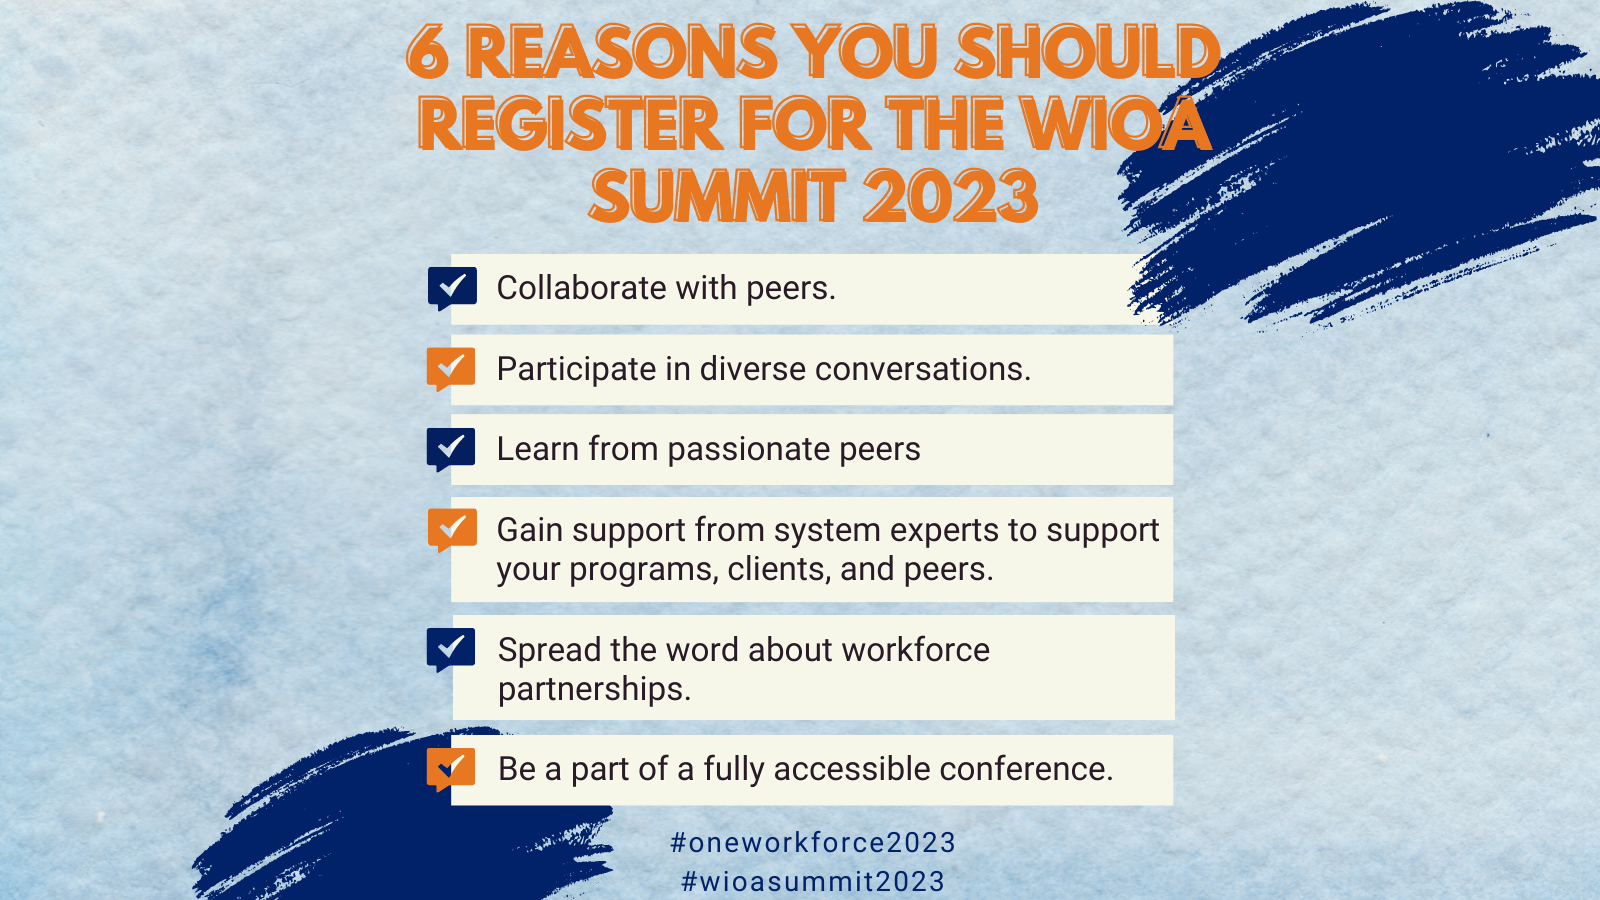 6 reasons you should register for the WIOA Summit